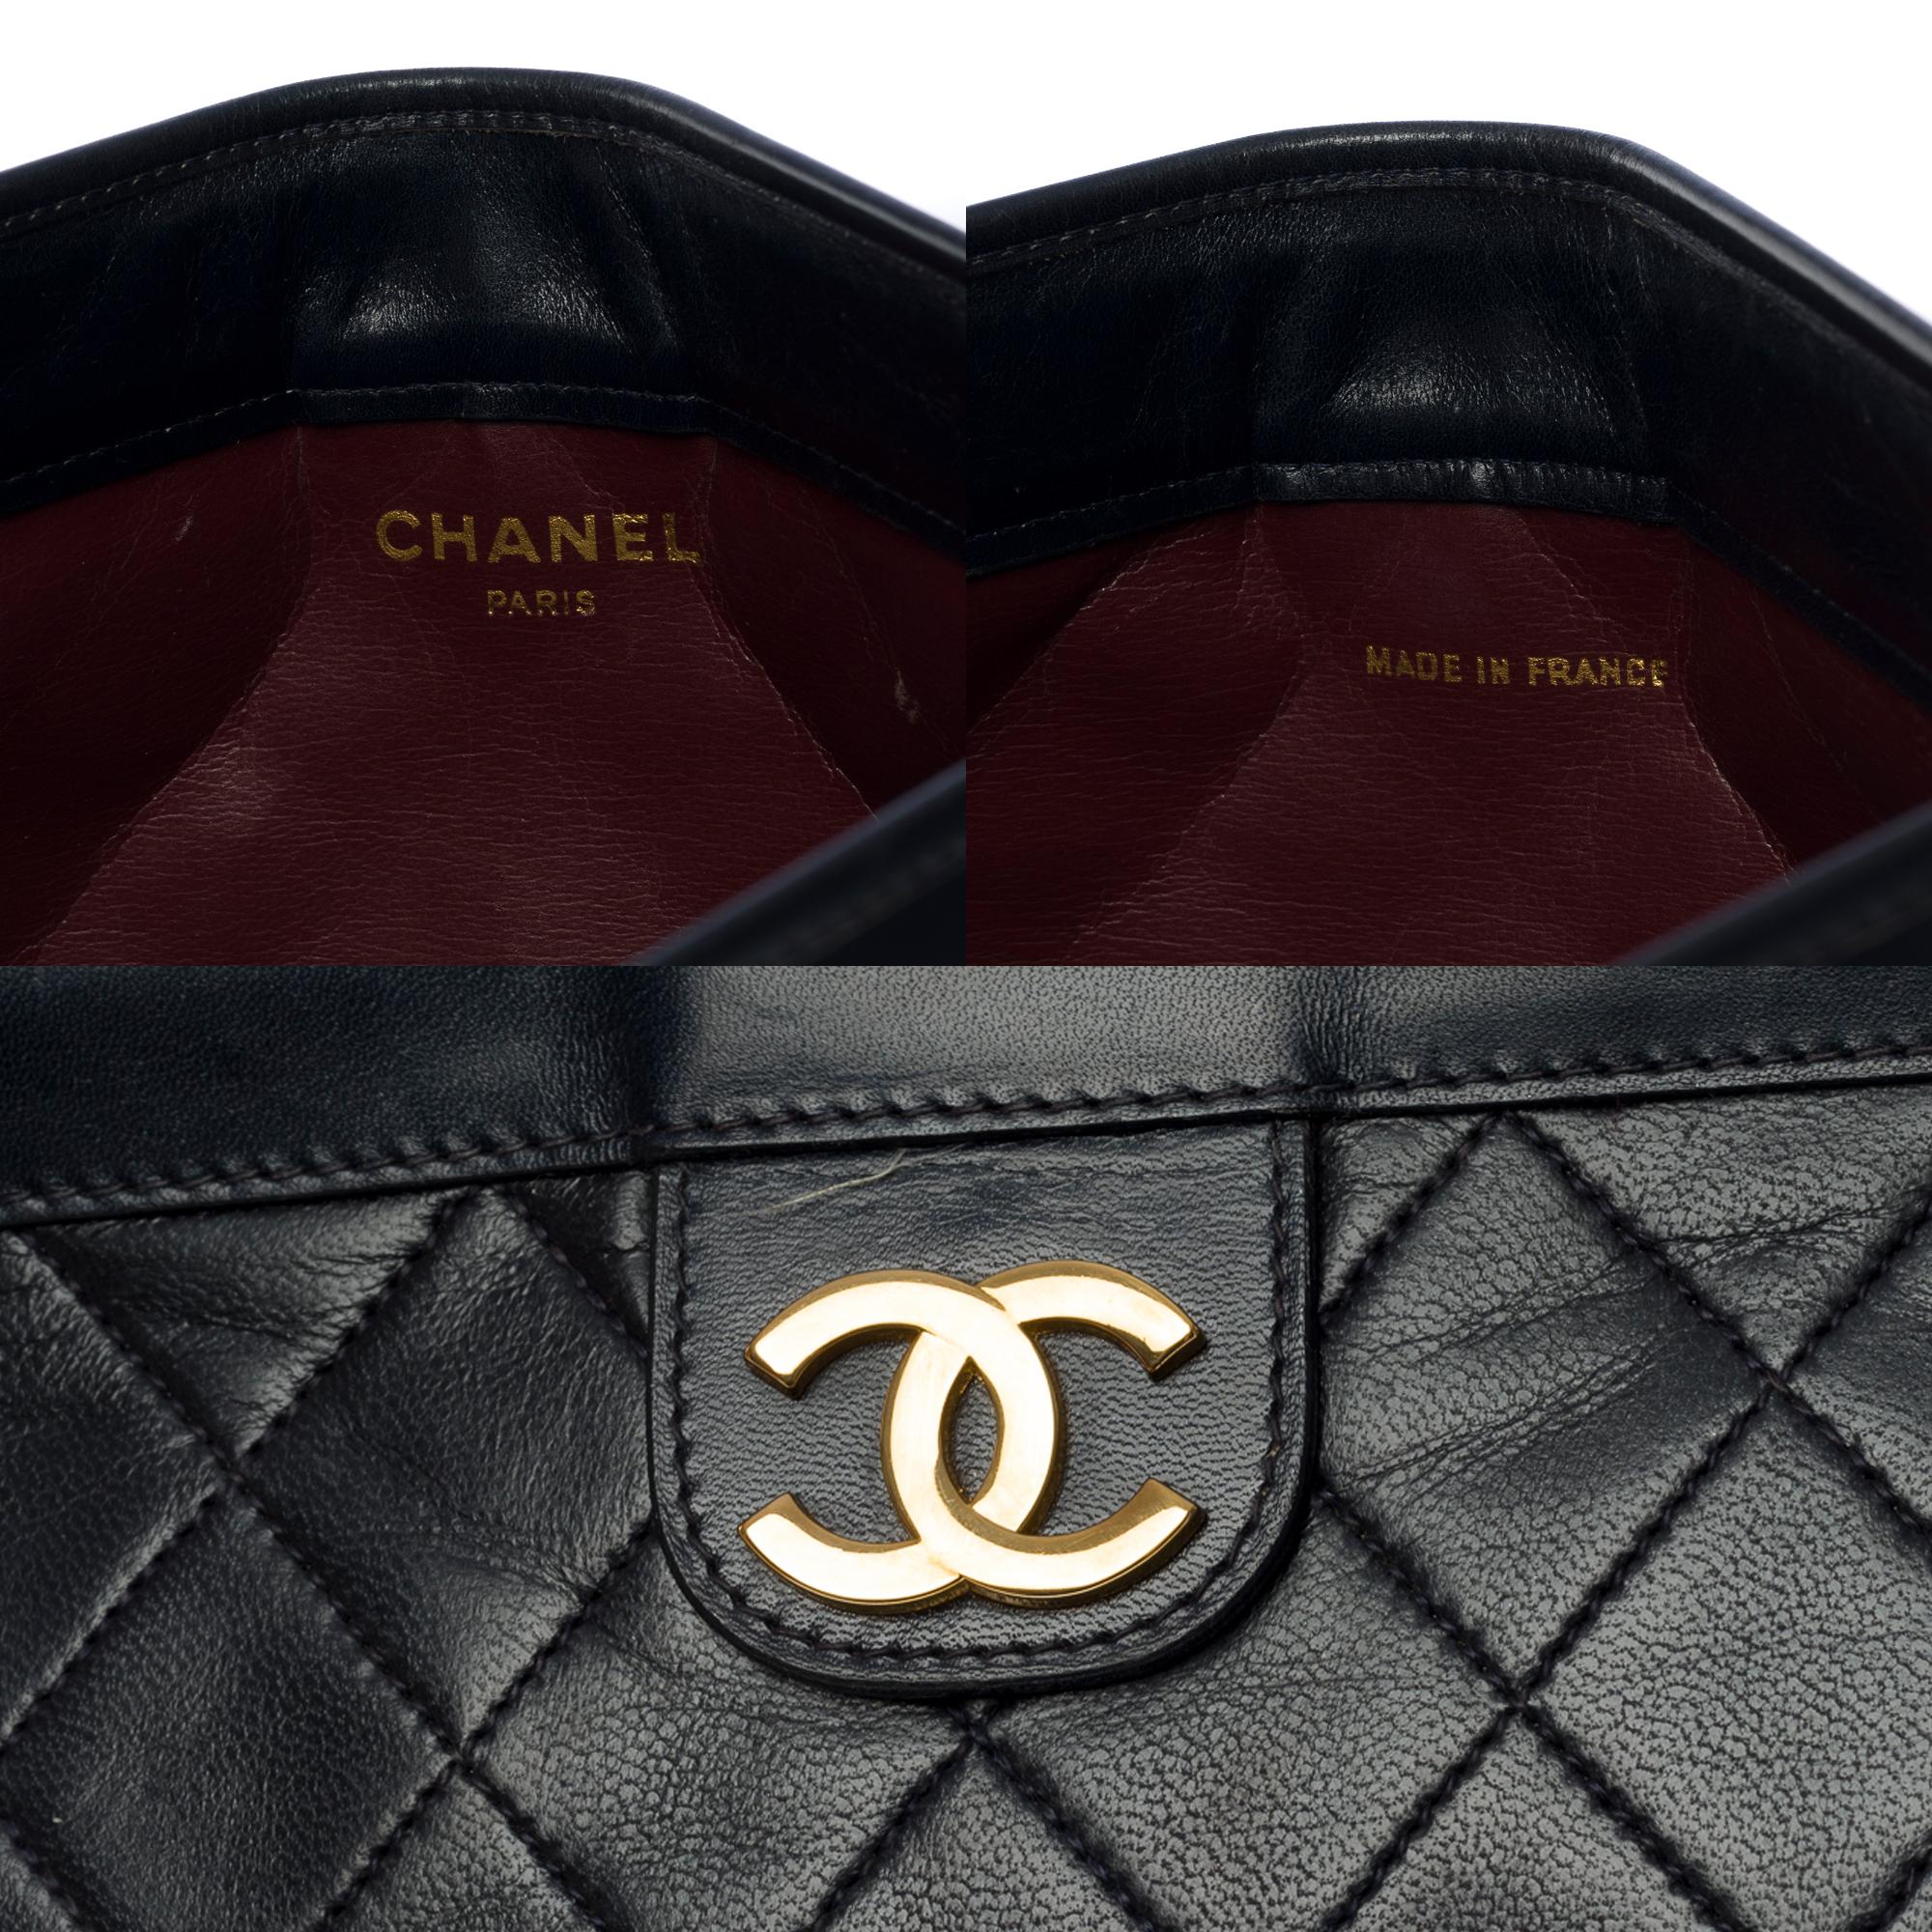 Amazing Chanel Classic Clutch in black quilted lambskin leather, GHW 1